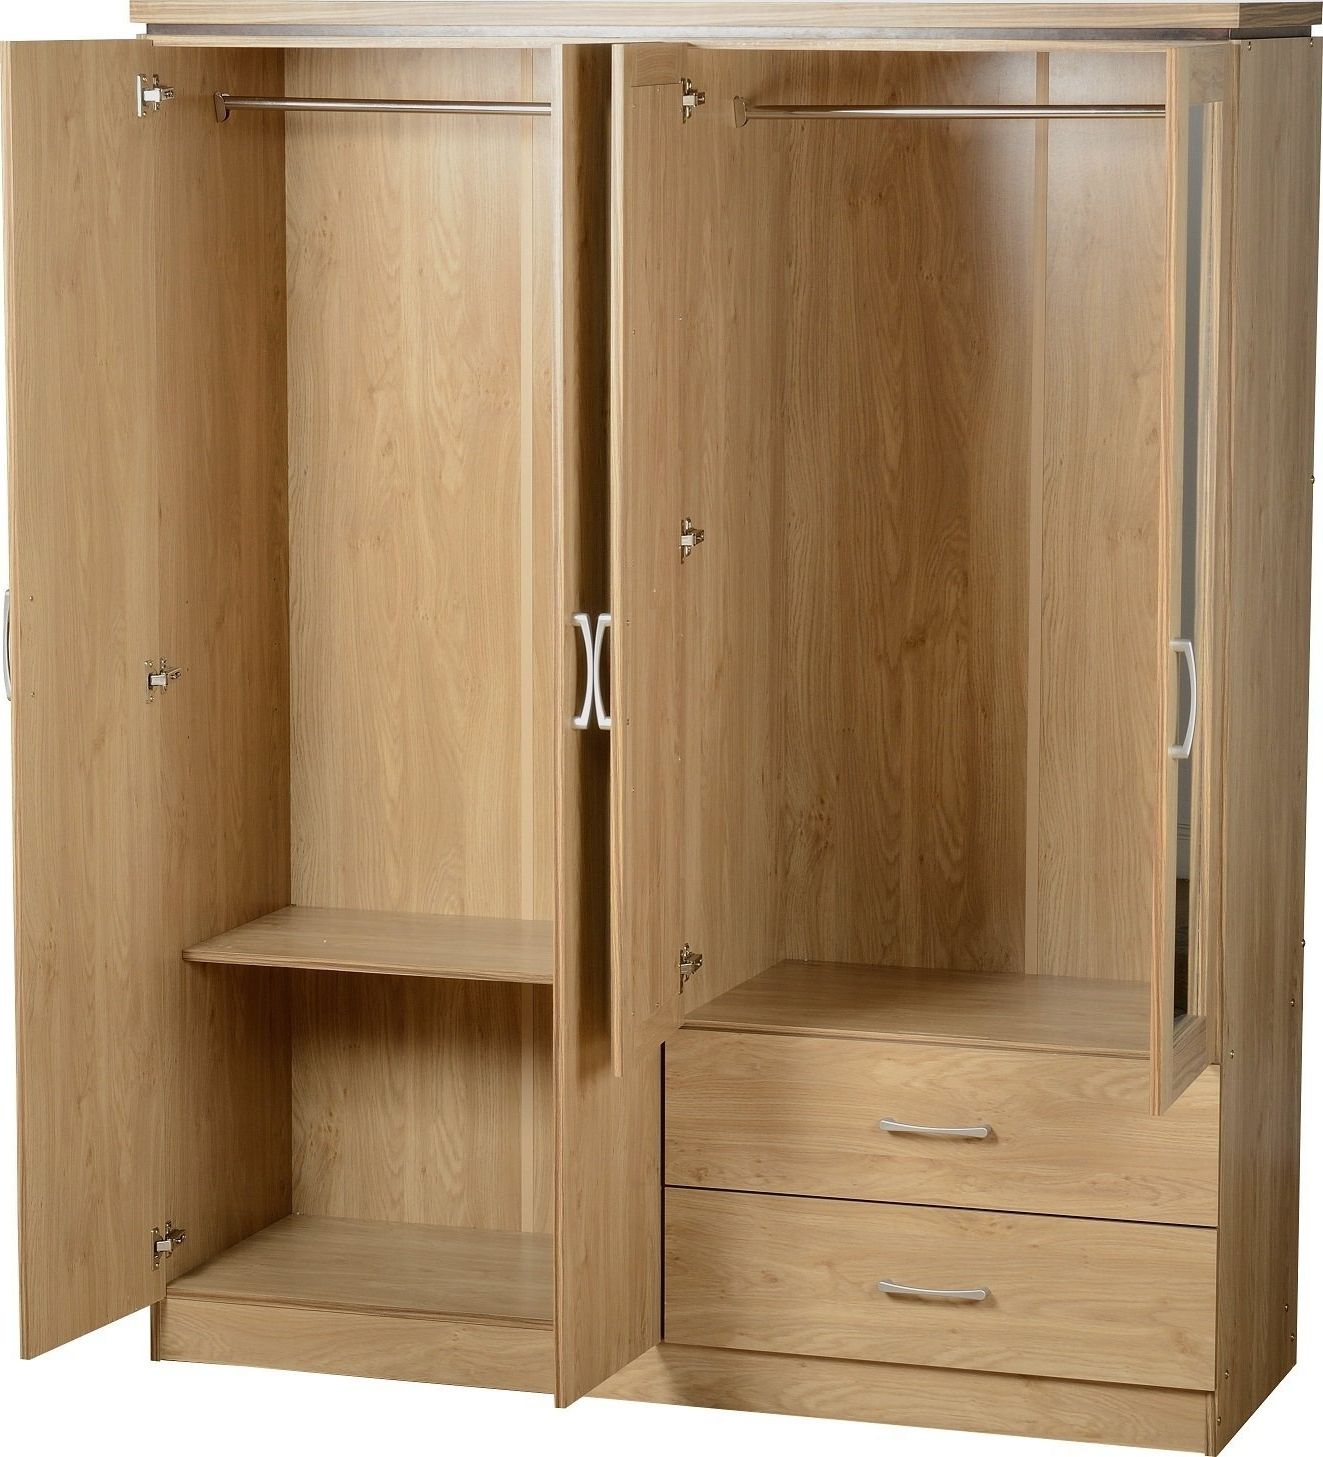 3 Doors Wardrobes With Mirror In Fashionable Charles 4 Door 2drw Wardrobeseconique: Amazon.co (View 10 of 15)